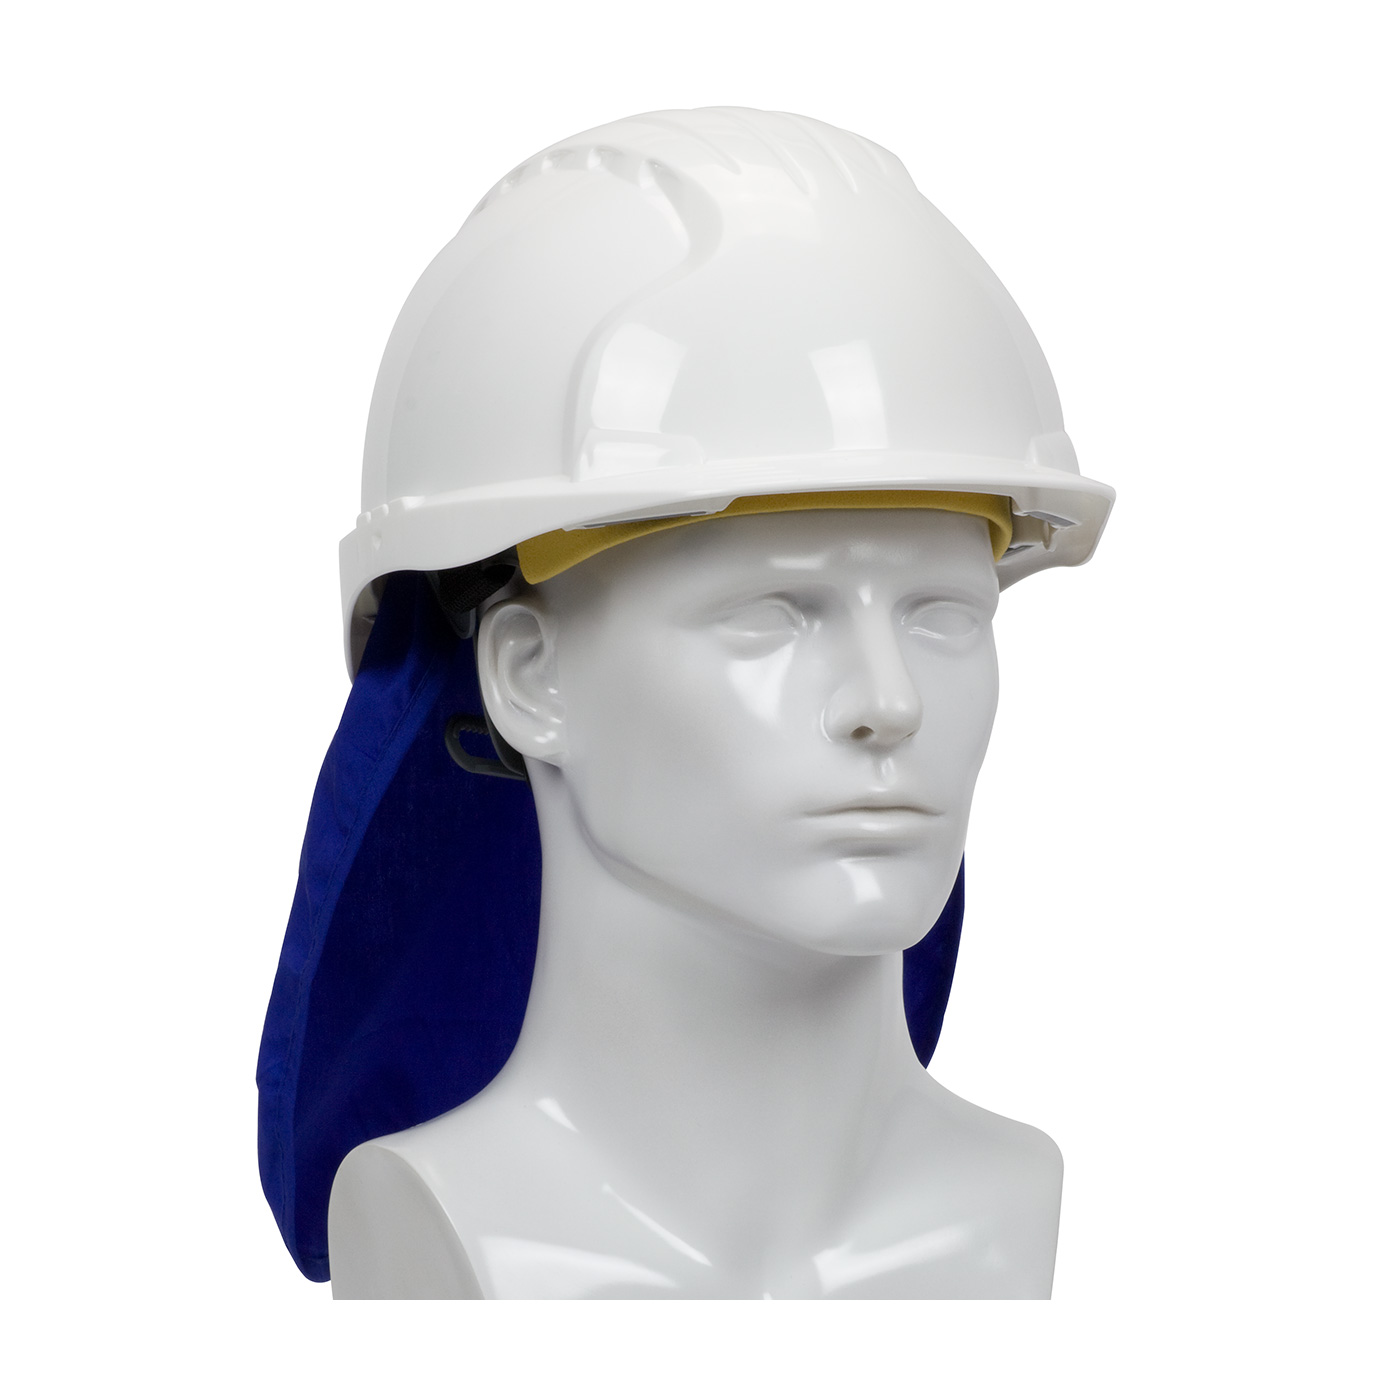 PIP 396-405-BLU EZ-Cool Evaporative Cooling Hard Hat Pad with Neck Shade PID-396 405 BLU